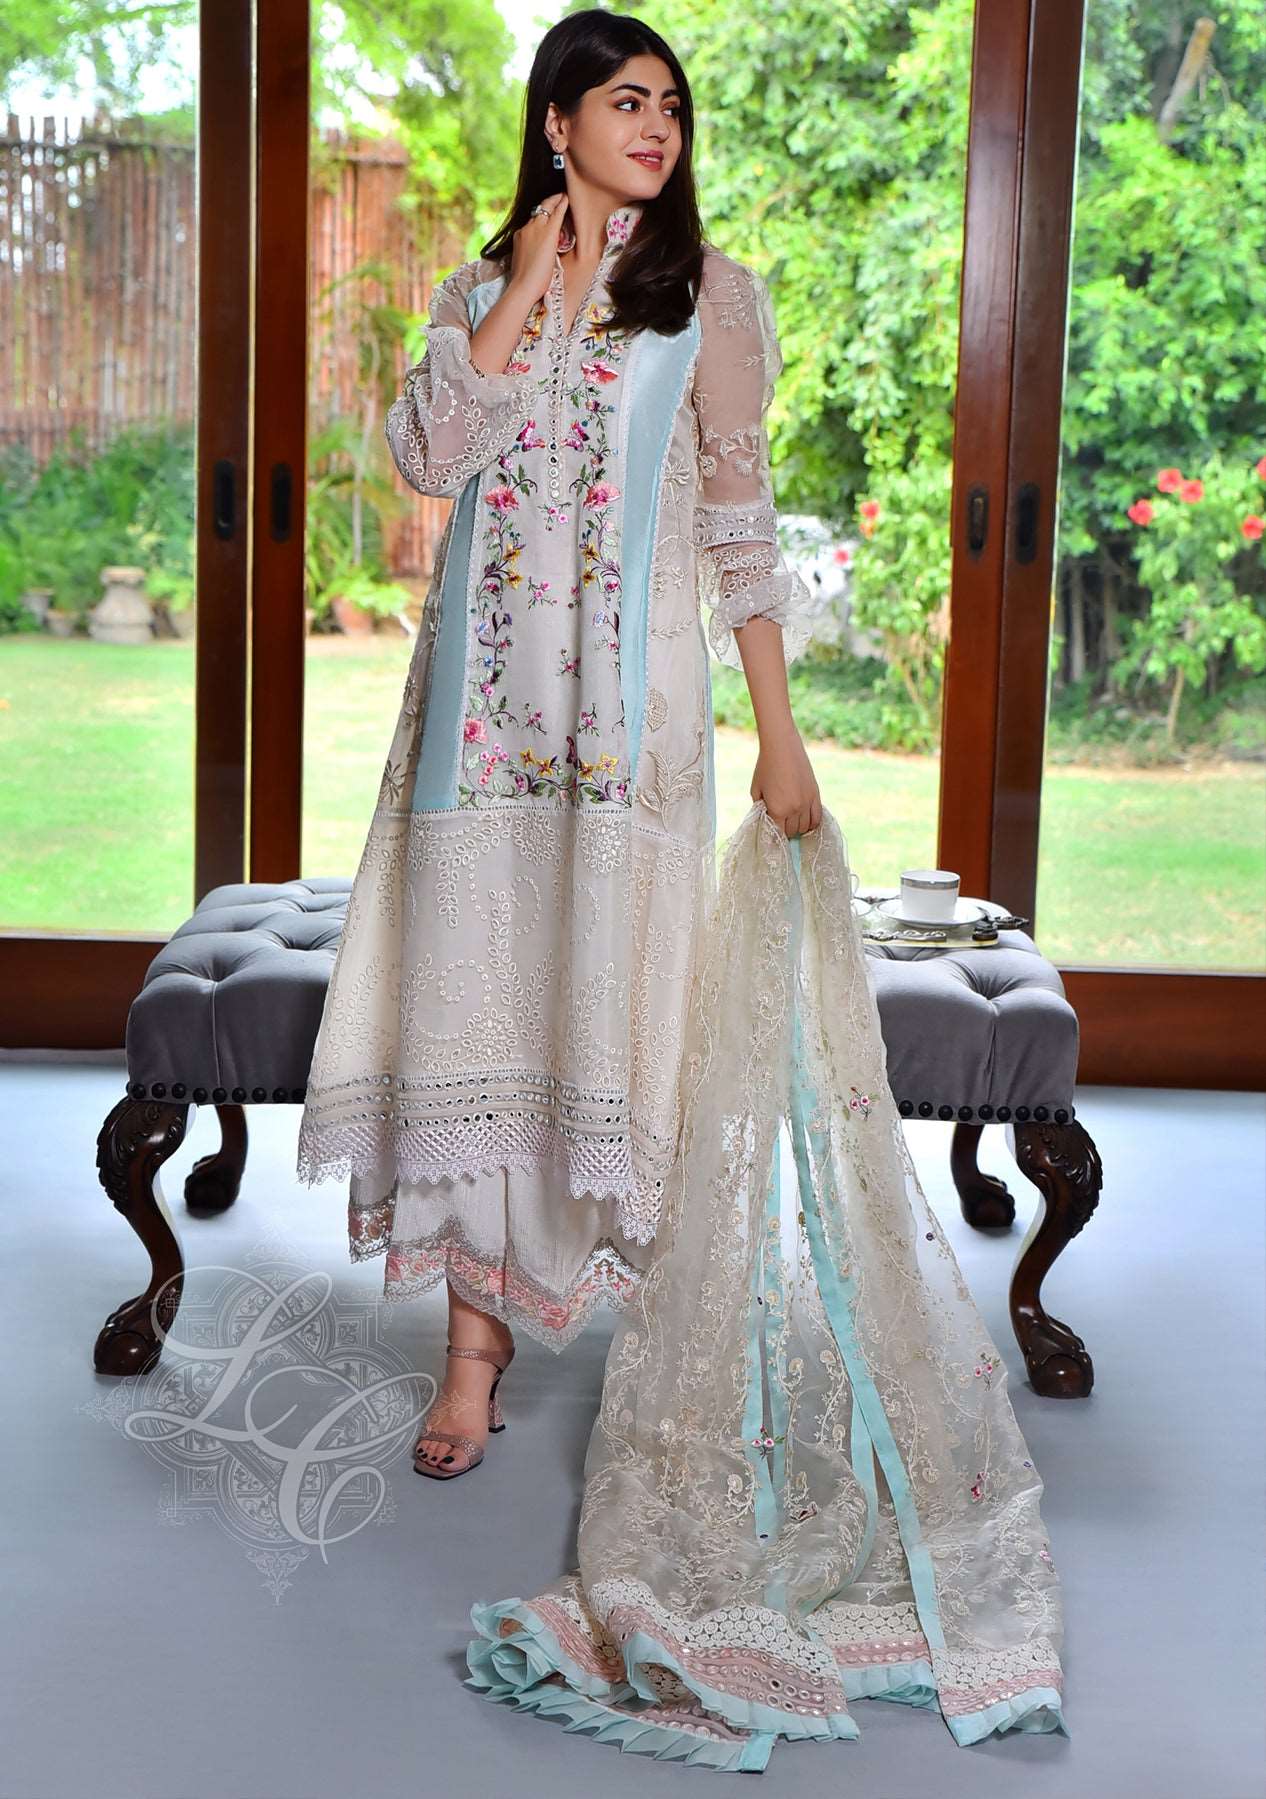 Off white kalidar paired with culottes and organza dupatta